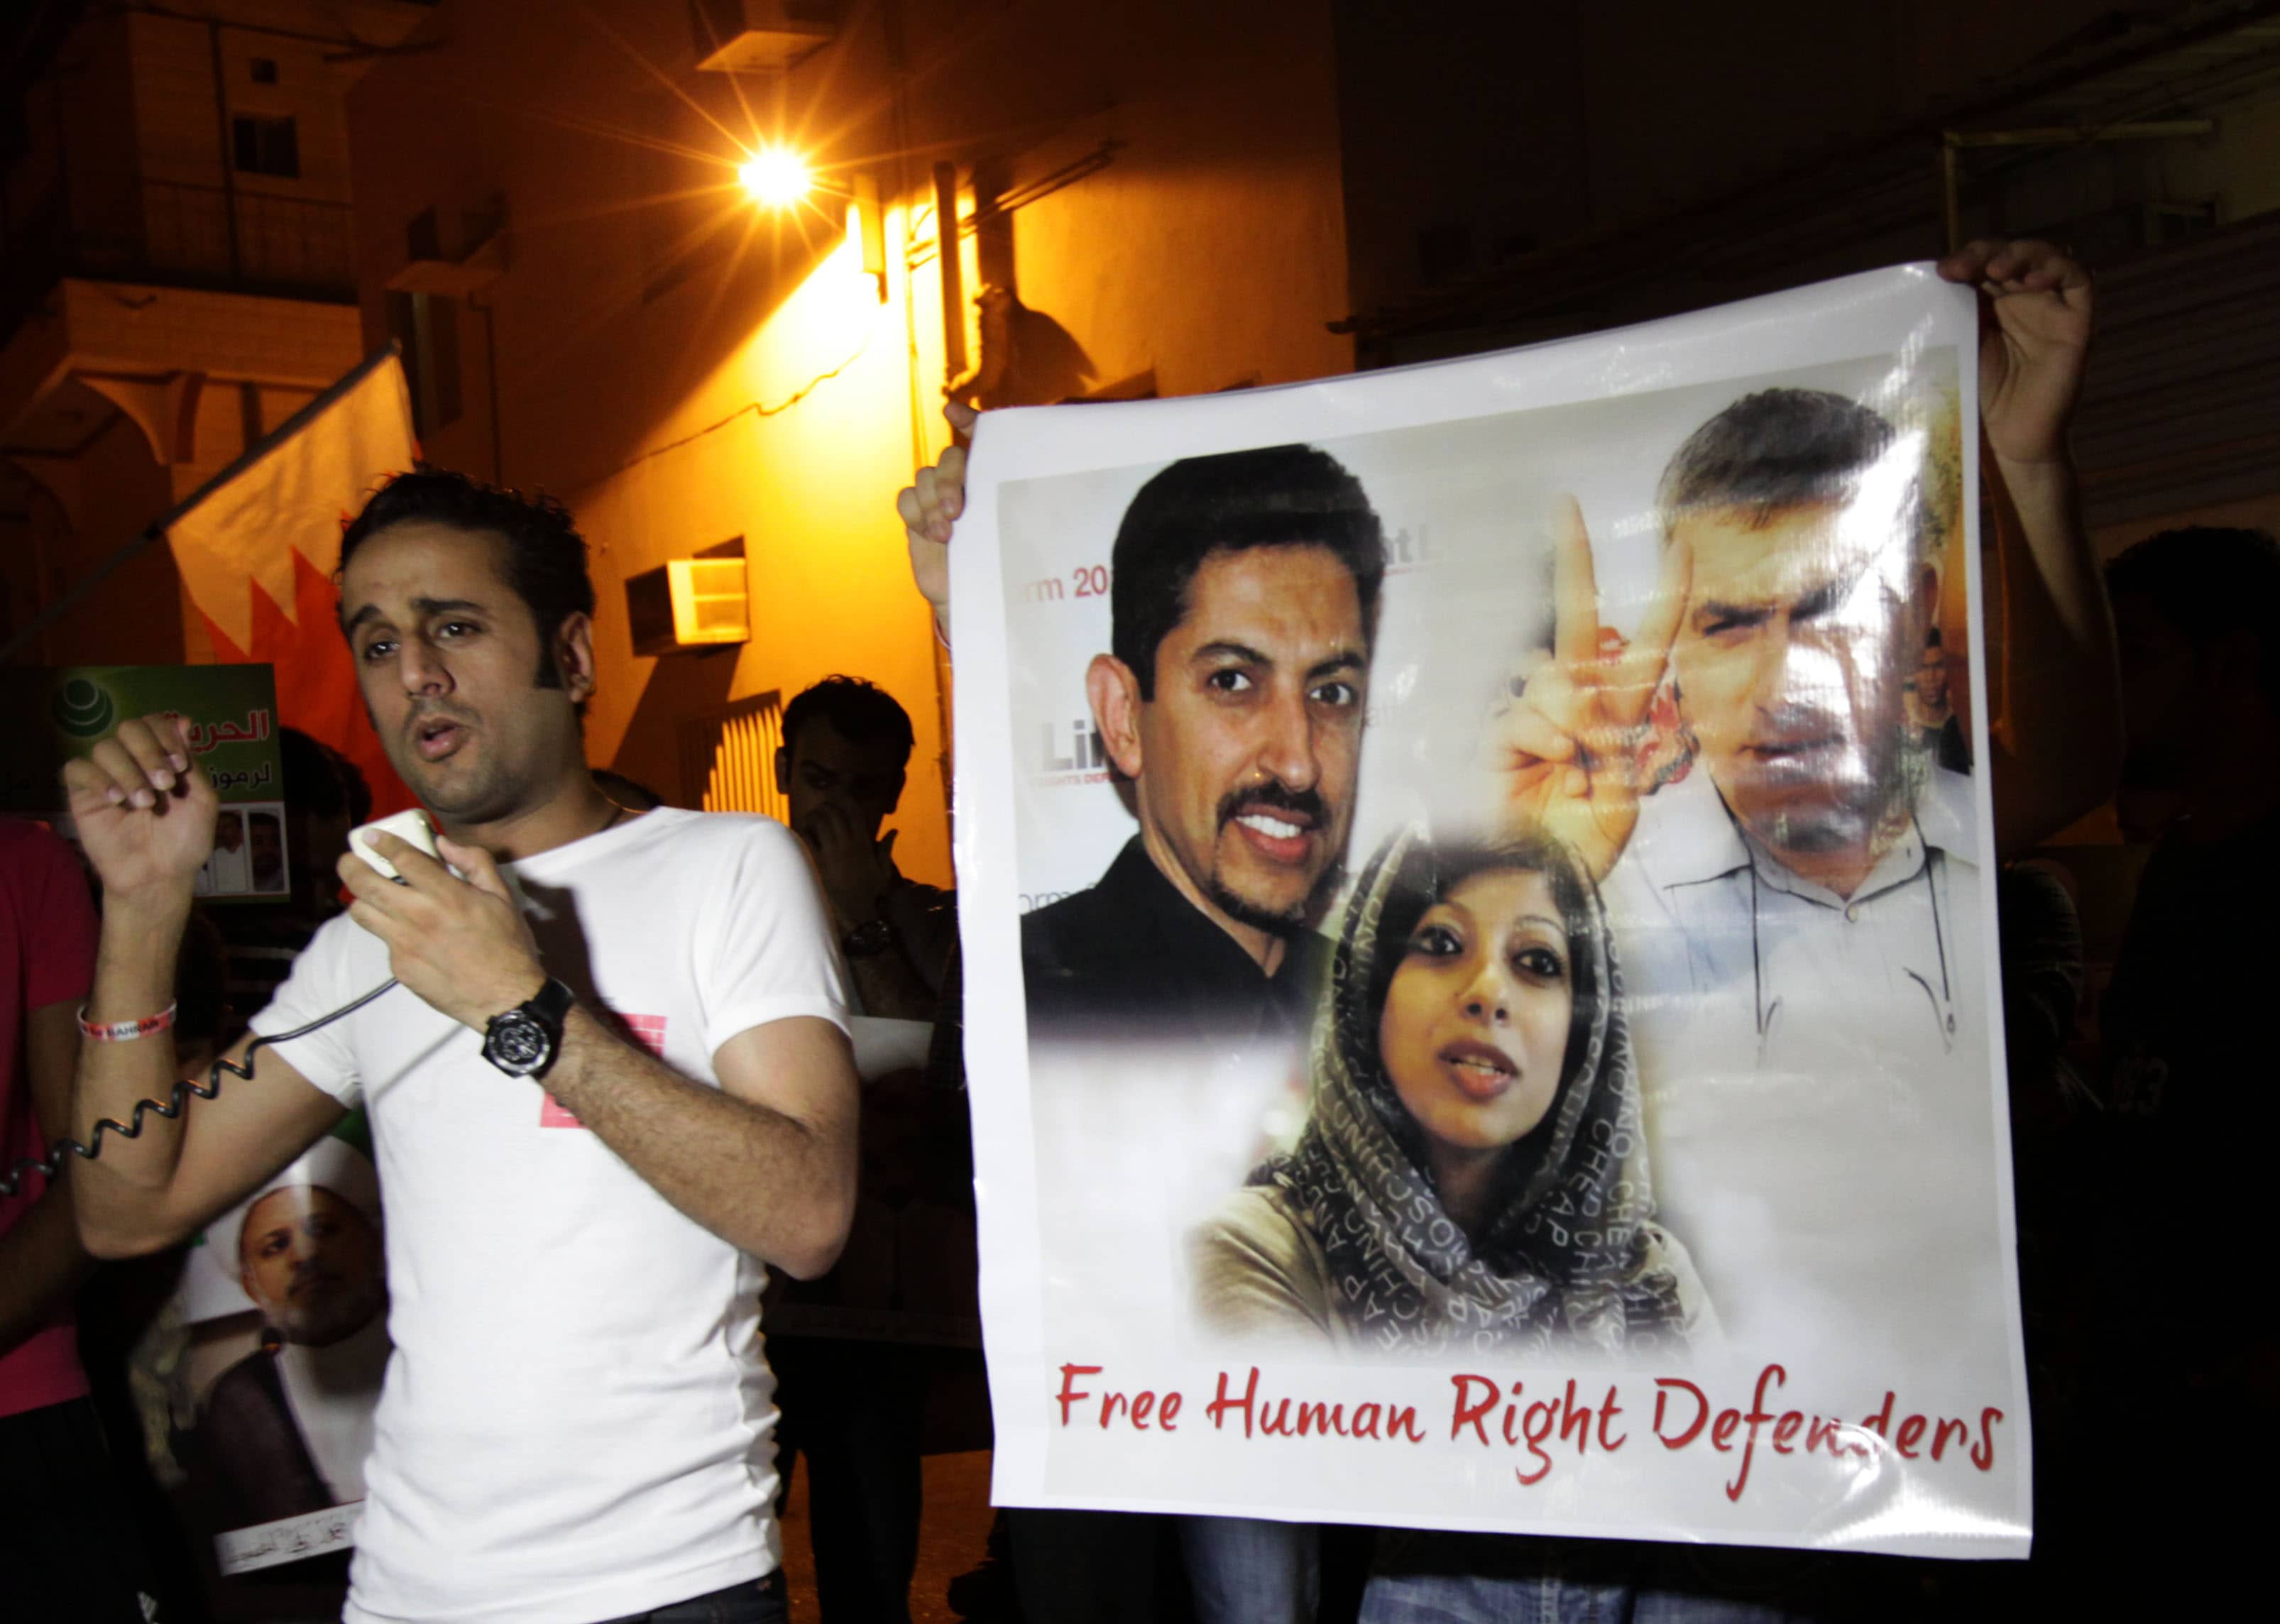 In this photo taken on 12 August 2012, activist Said Yousif al-Muhafdah speaks to protesters in Bahrain, calling for freedom for jailed rights activists seen on the poster at right, Abdul Hadi al-Khawaja, Nabeel Rajab and Zainab al-Khawaja, AP Photo/Hasan Jamali